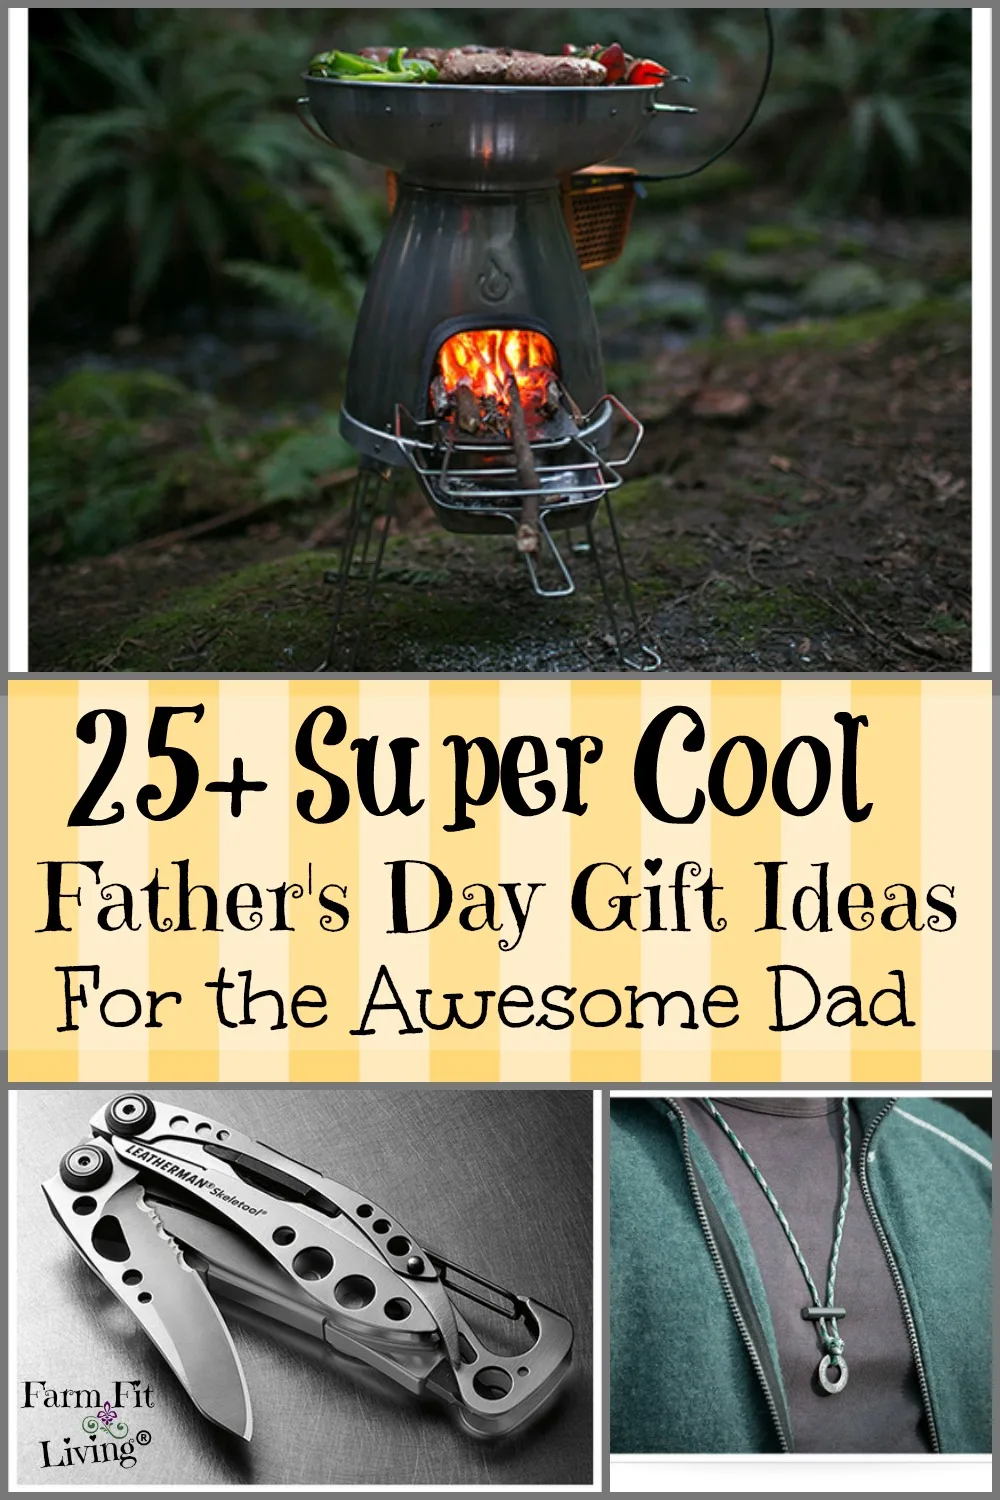 Affordable Gifts For Dad On Father's Day - Father's Day Presents -  woodgeekstore